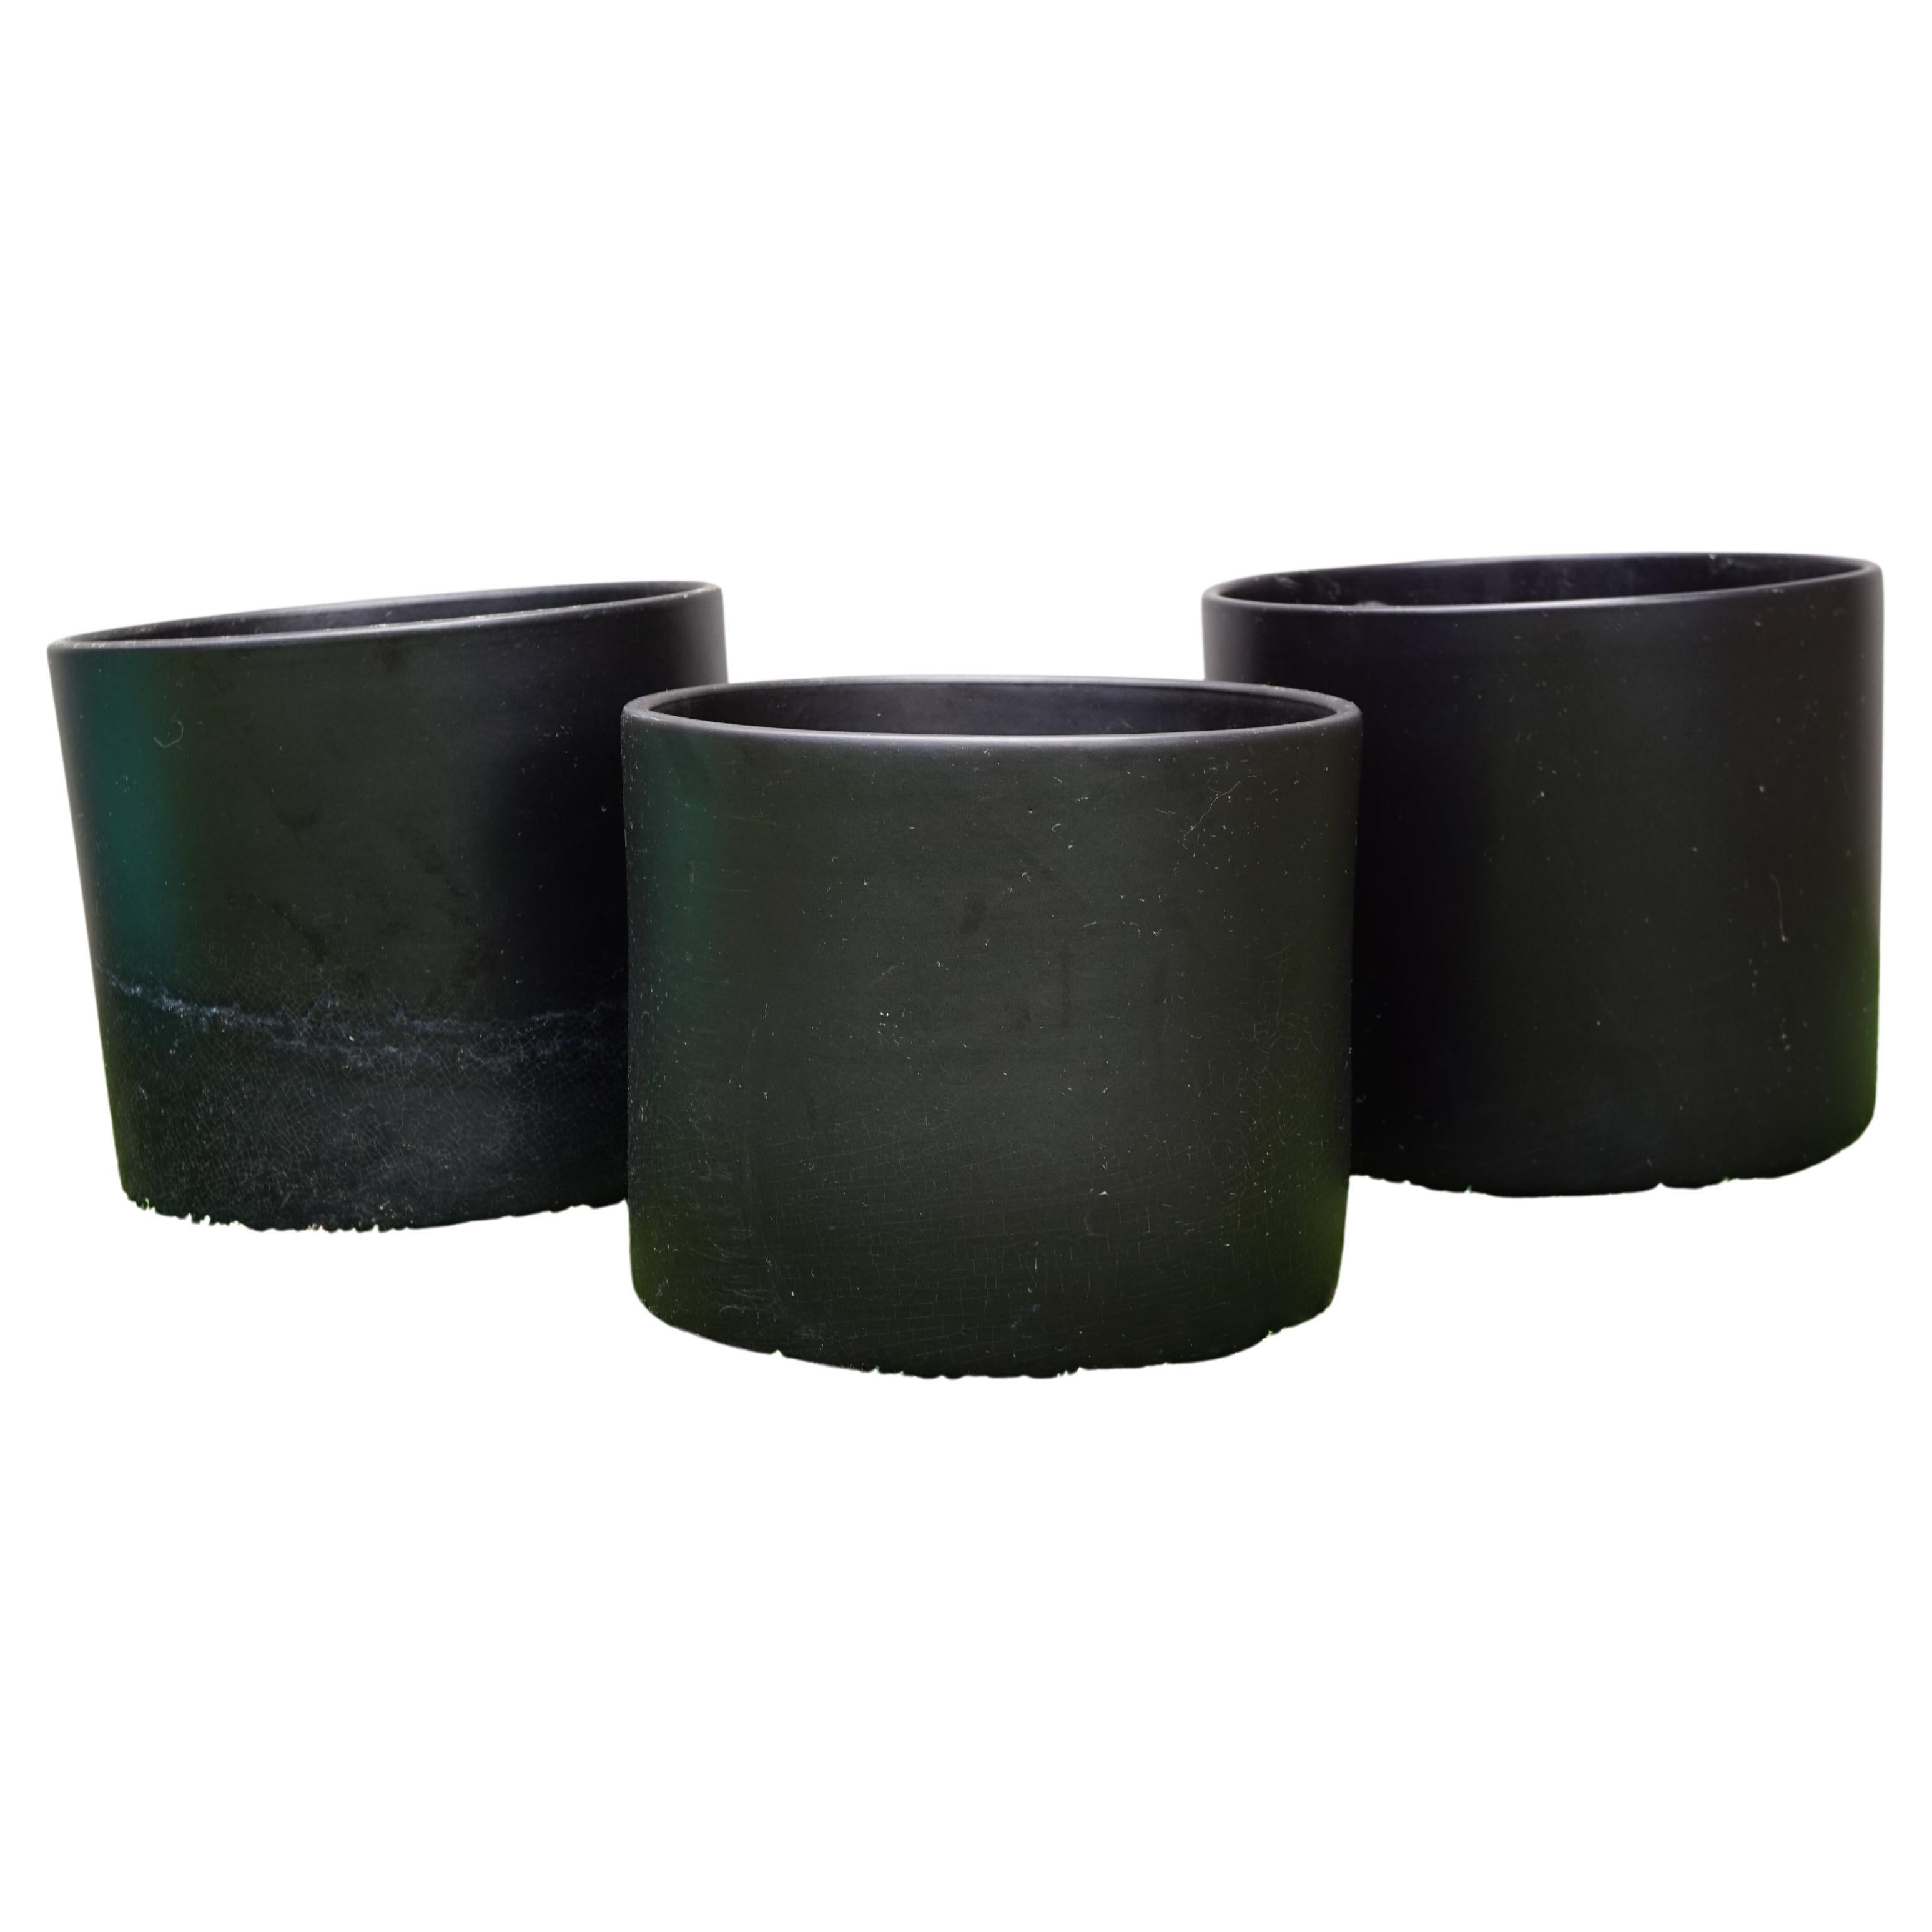 Midcentury Architectural Pottery Black Ceramic Planters by Gainey 'Set of 3' For Sale